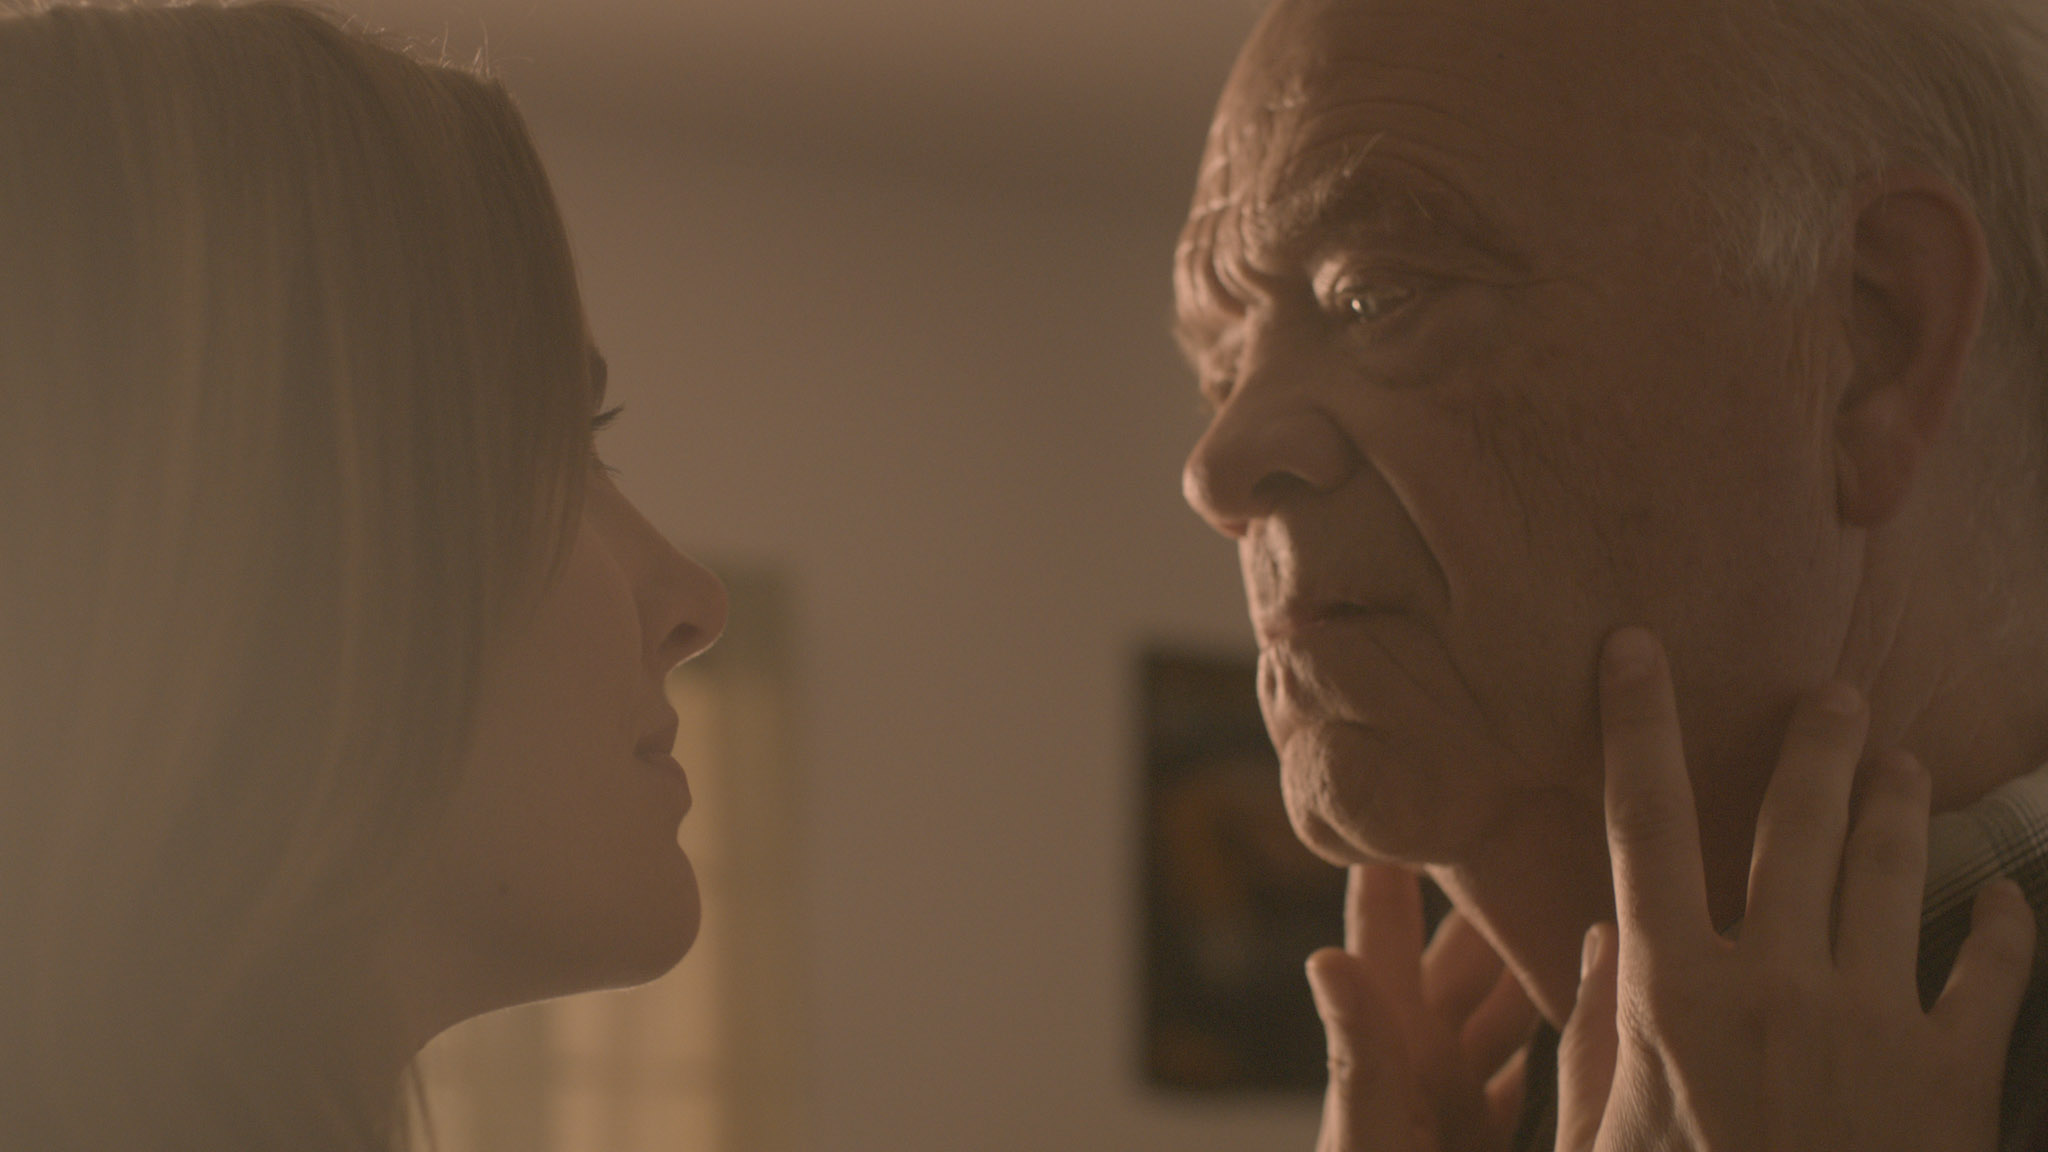 Joel takes in the new Alice. Youth, a short film coming in 2016. Starring Jessica Stroup and George Maguire, directed by Brett Marty. A sci-fi film about growing old in a world of perpetual youth.